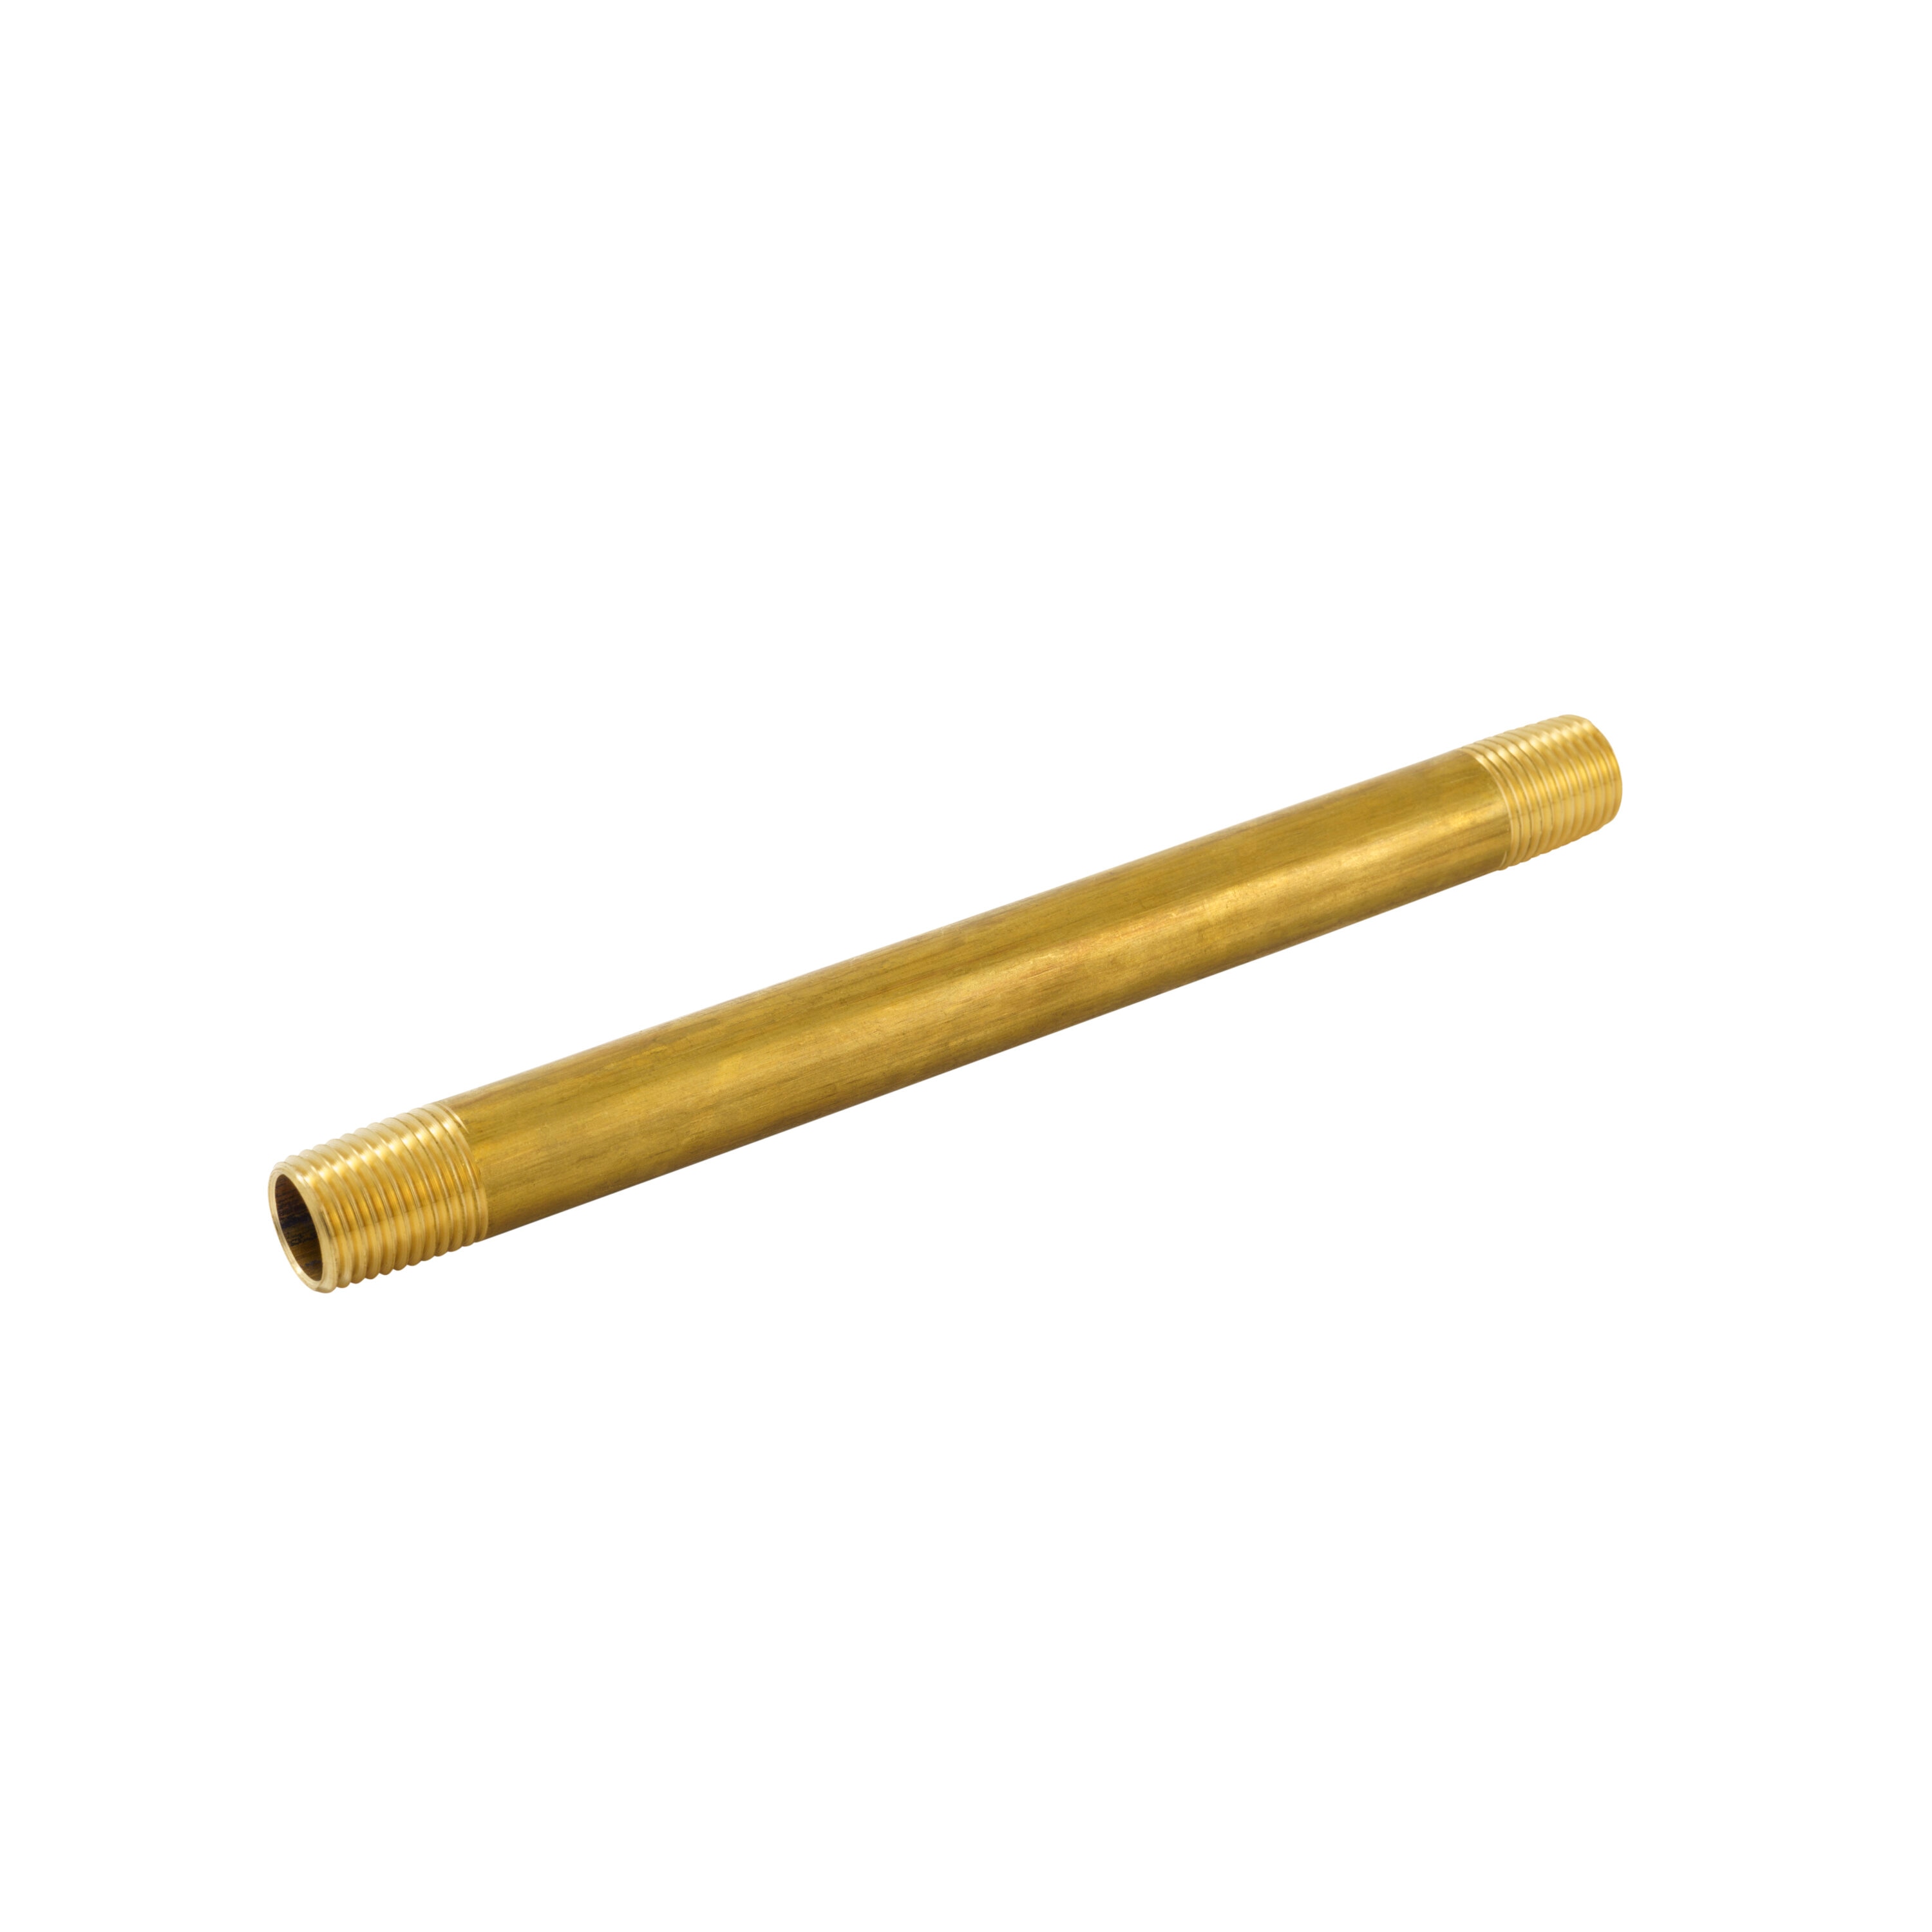 Proline Series 3/4-in x 1-in Threaded Male Adapter Bushing Fitting in the Brass  Fittings department at